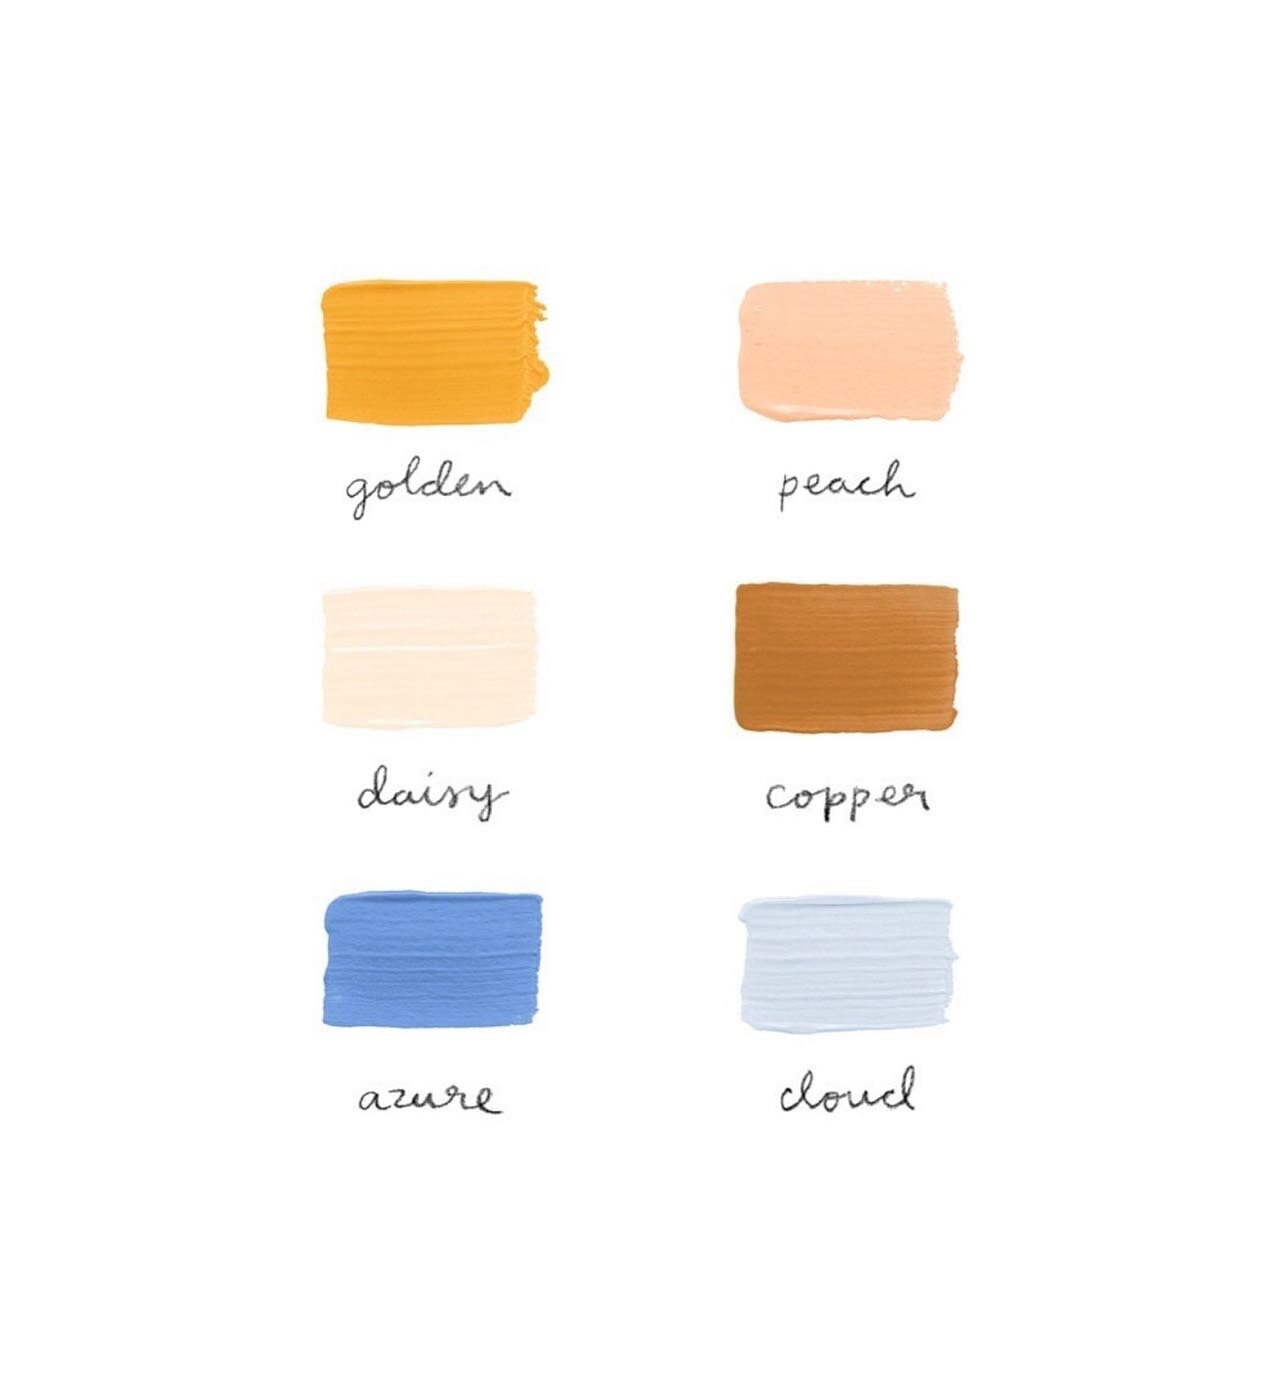 Current palette from @jenbpeters 🥛

#colorpalette #branding #pantone